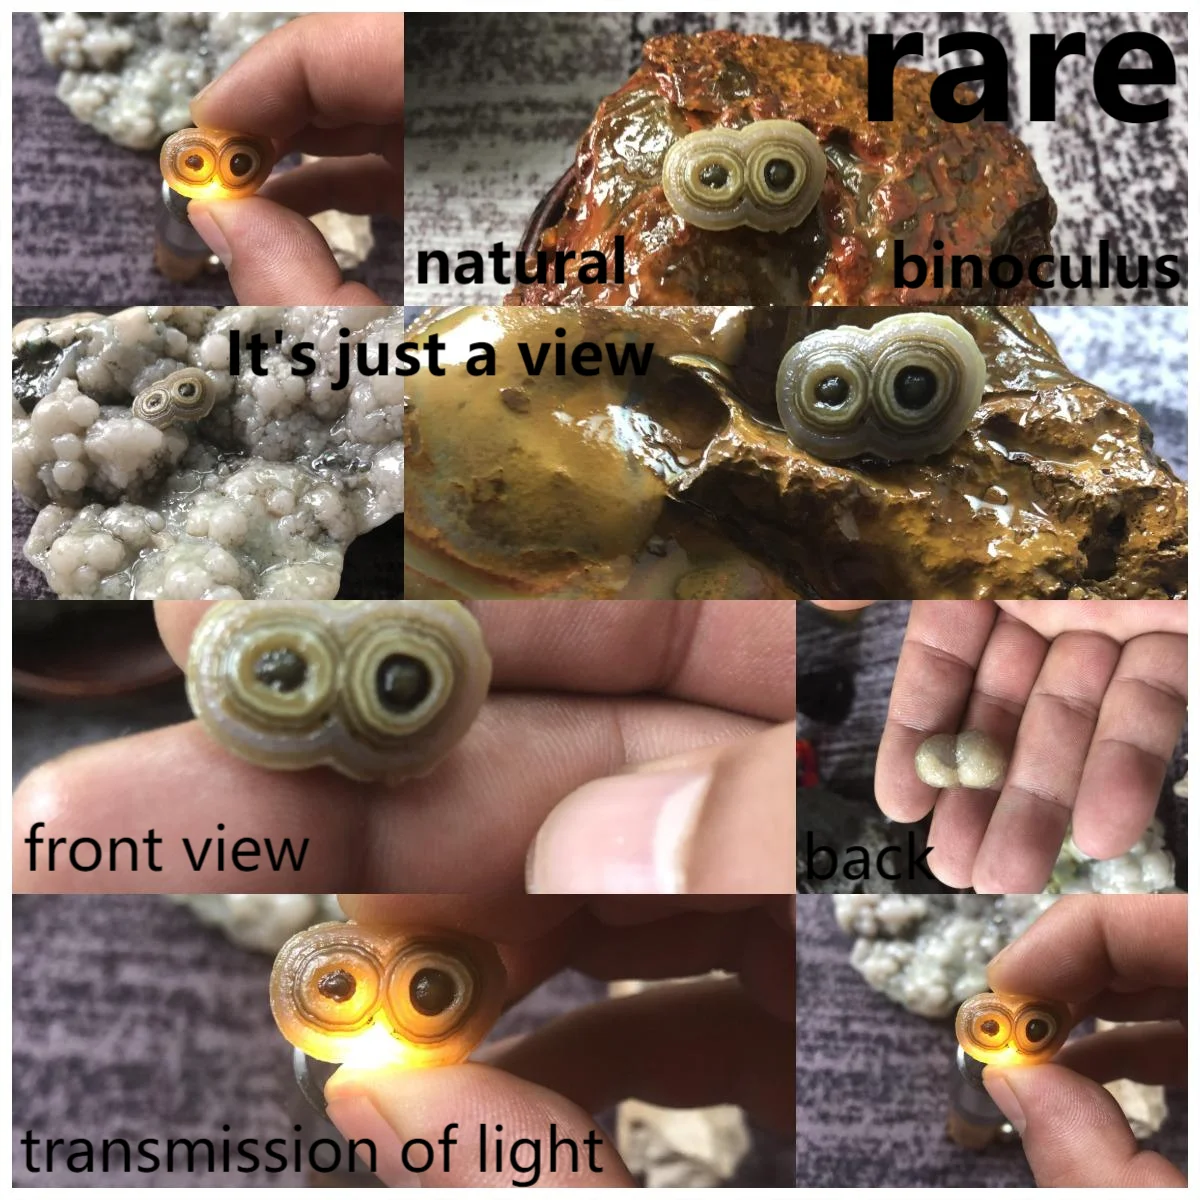 1kg making jewelry nature stone nature crystal of god has charms the turchen belief shaman stone channels healing energy love 1Pcs Nature Stone Making Jewelry Of God Has Charms Gem Of Inner Mongolia Gobi Alxa Eye Stone Boutique All Selected God's Work